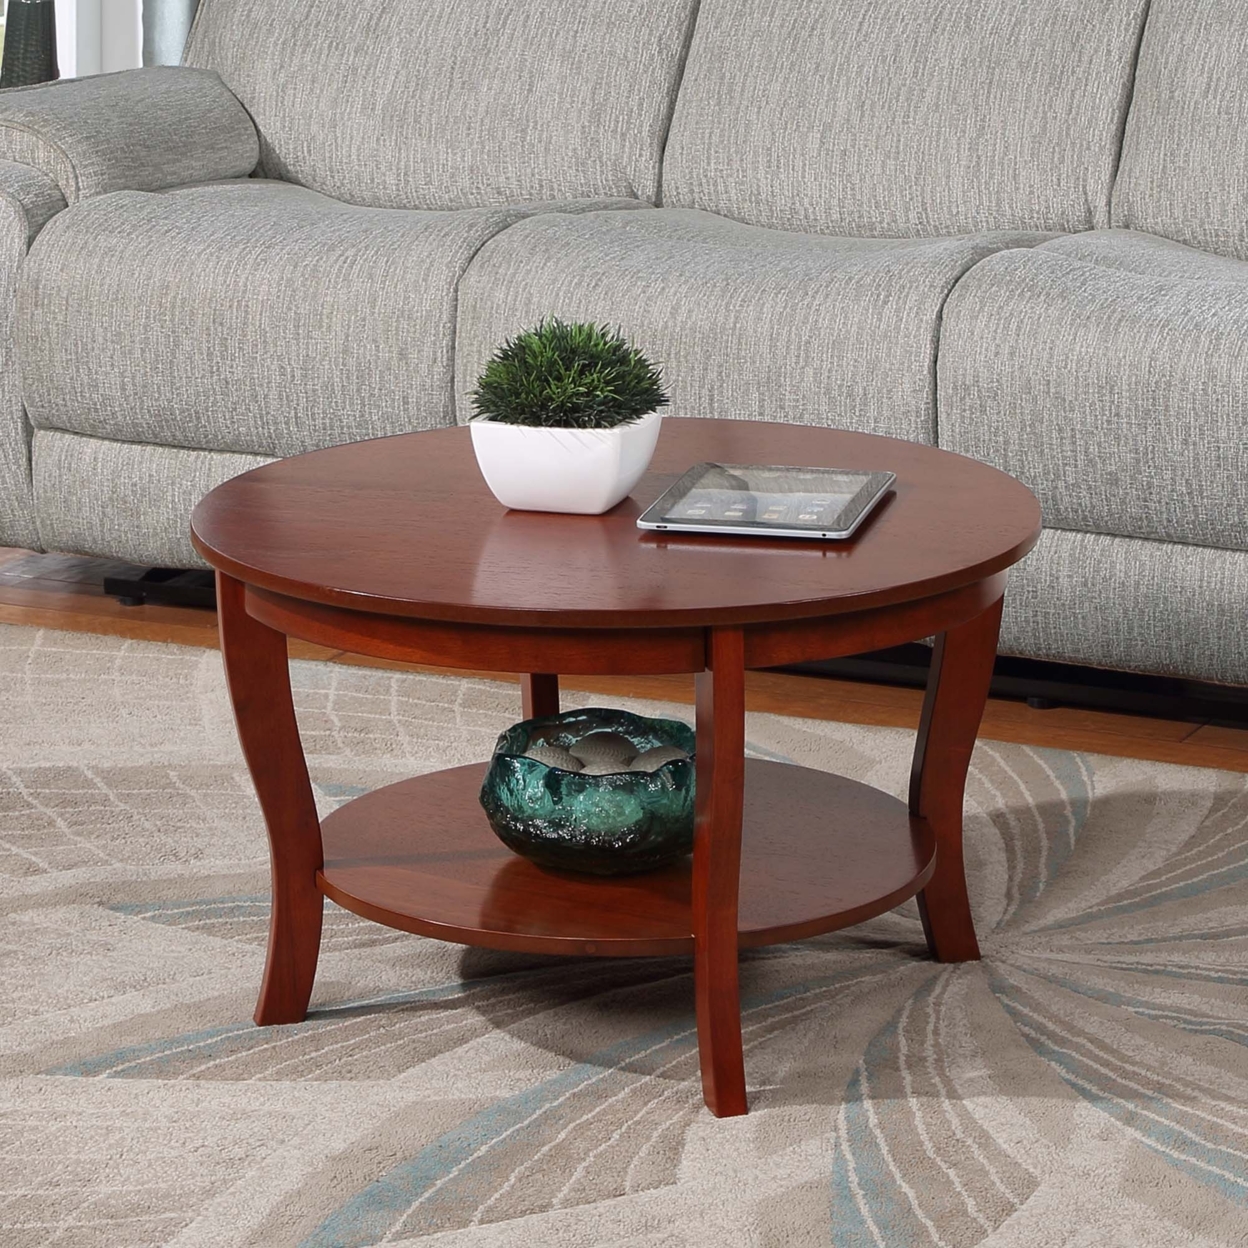 American Heritage Round Coffee Table with Shelf, Brown